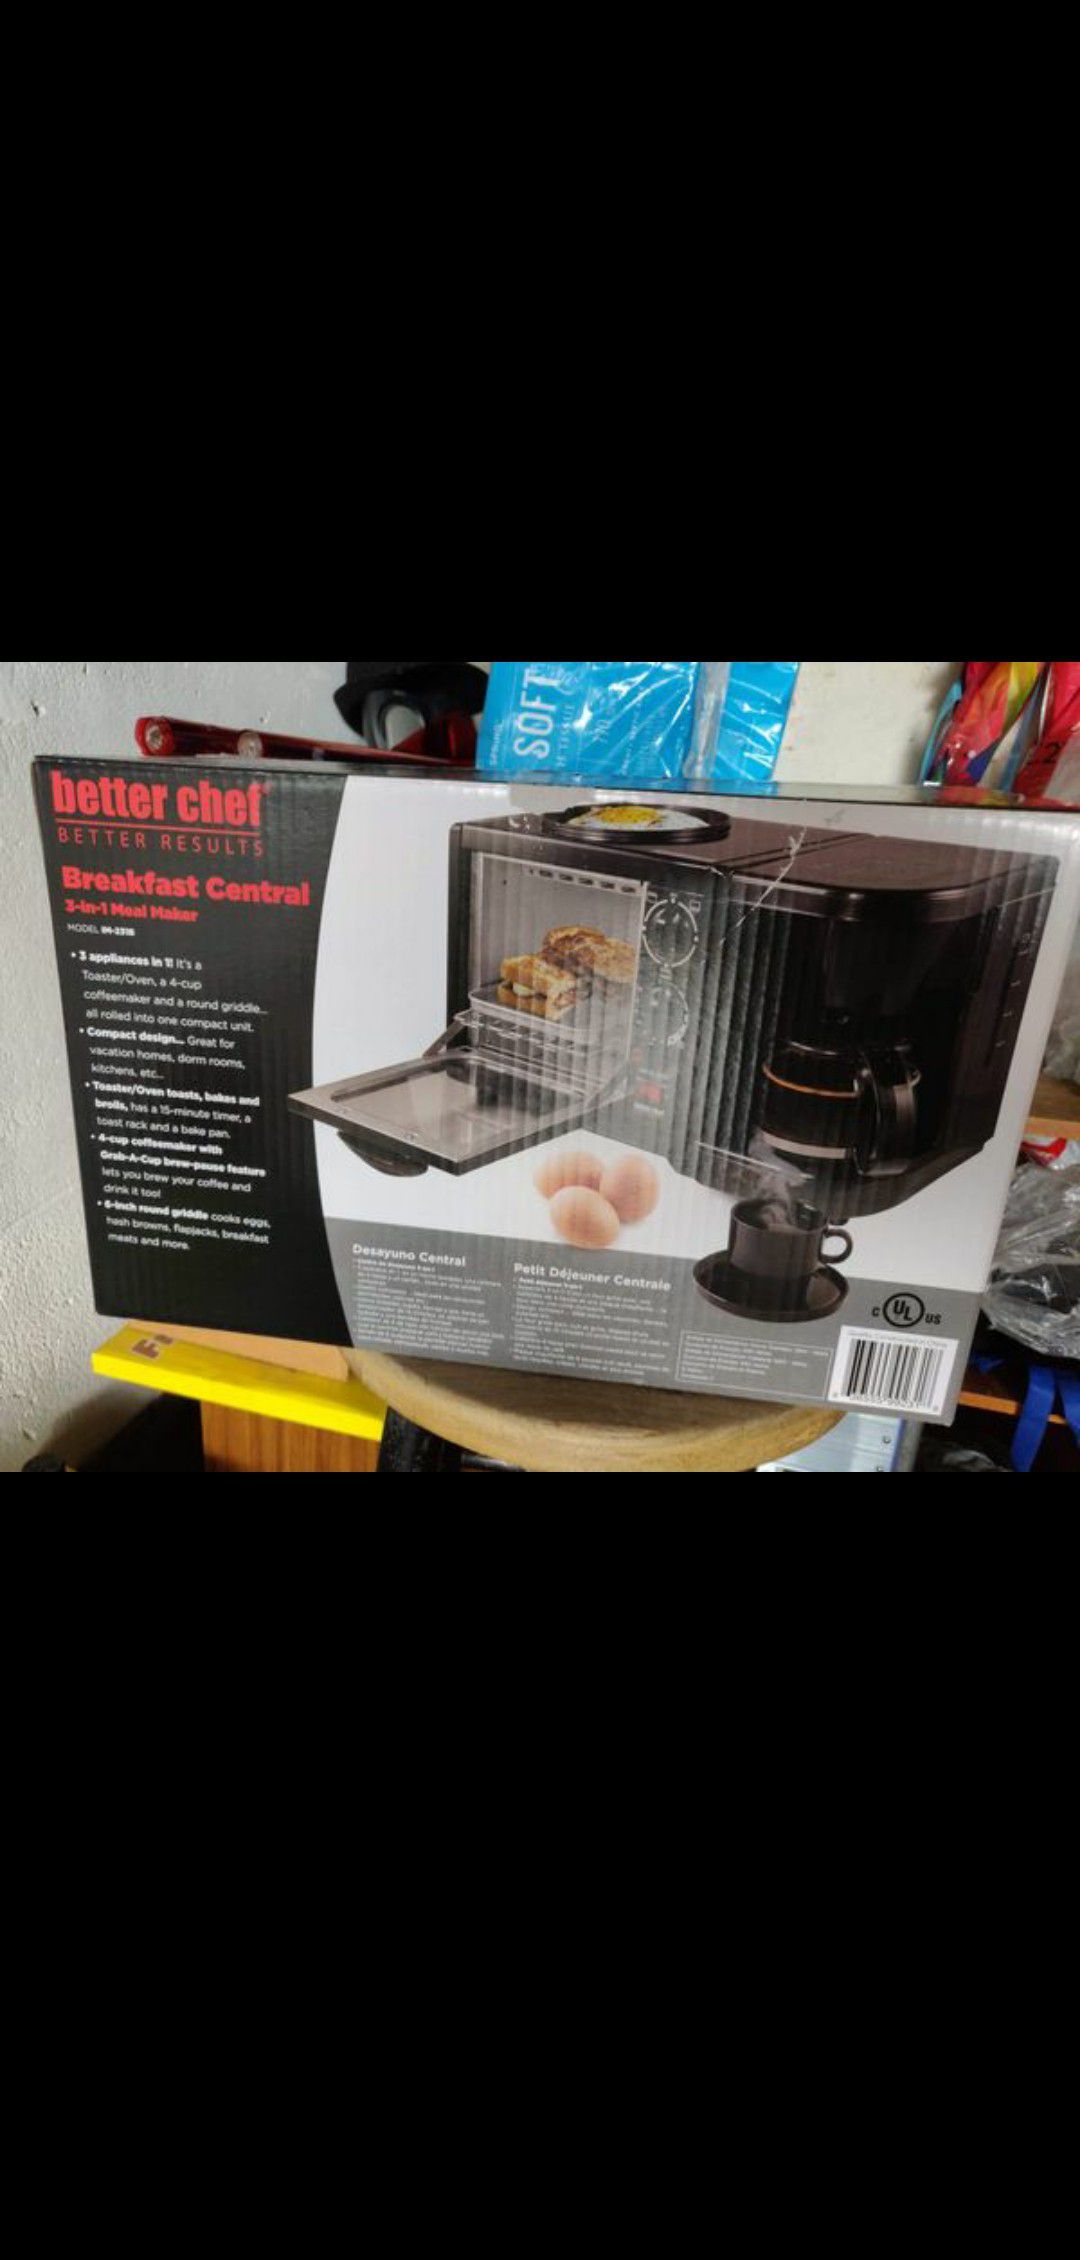 Brand New Better Chef Breakfast Central 3-in-1 Meal Maker- Black (toaster/oven, coffee maker, griddle) Great for dorm